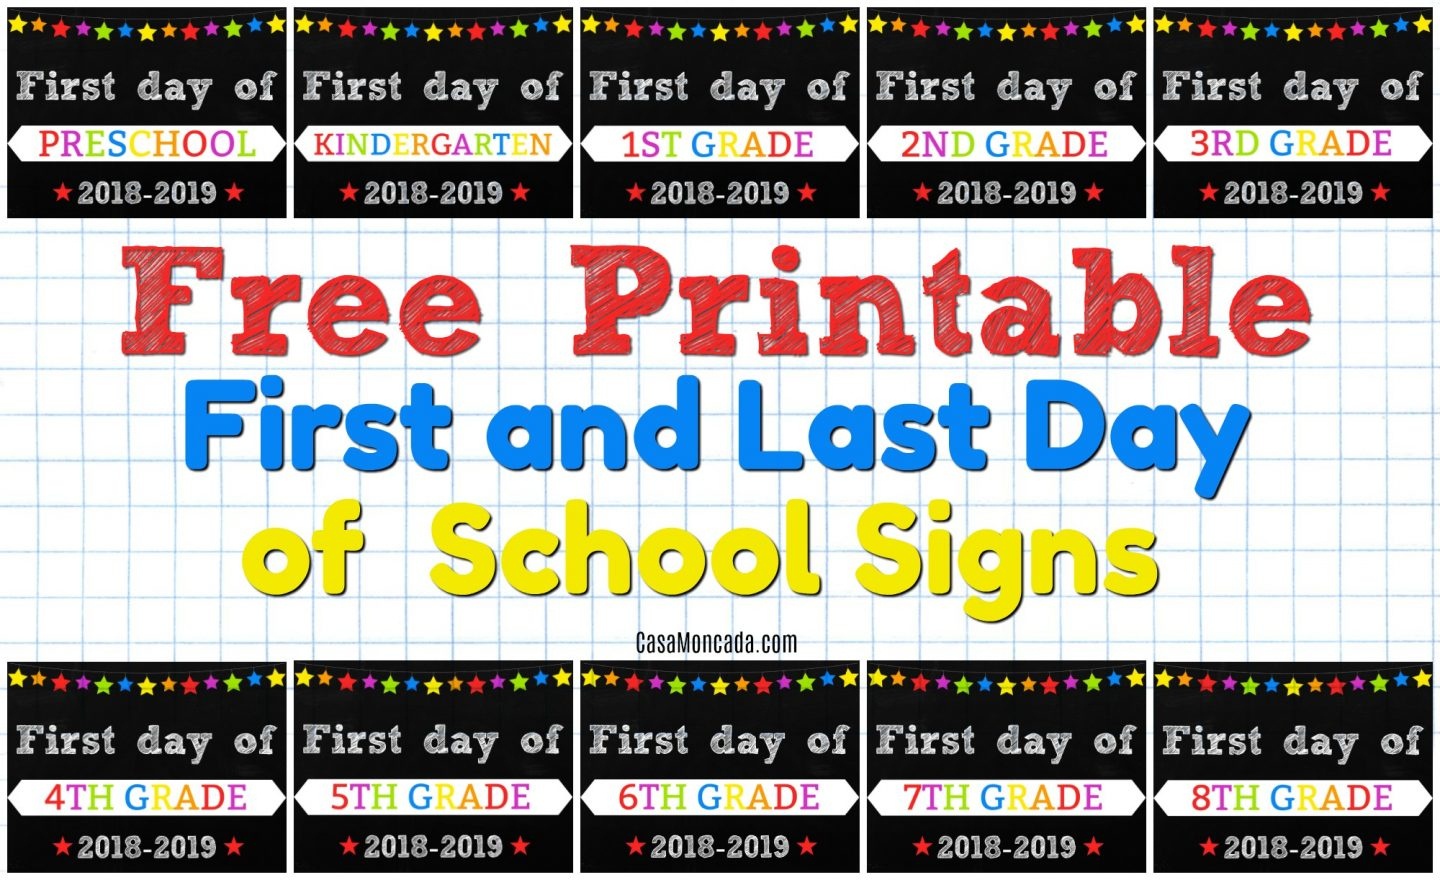 Free Printable First And Last Day Of School Signs - Casa Moncada - Free Printable Back To School Signs